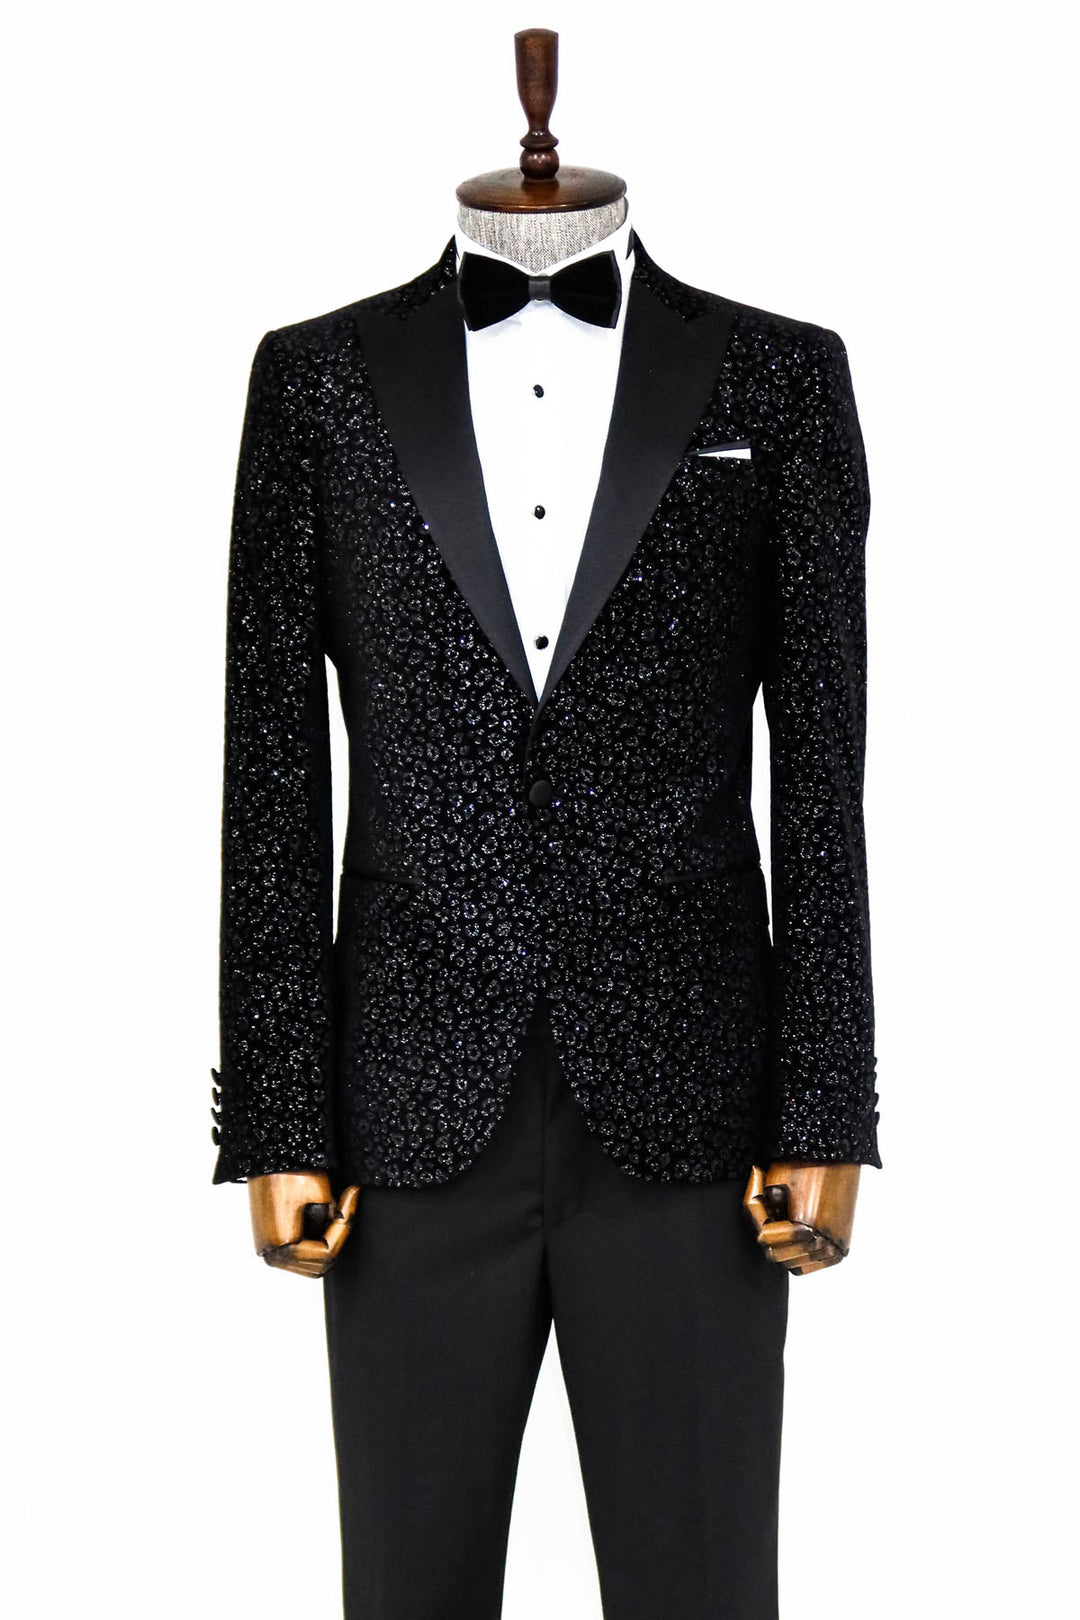 Leopard Pattern Slim Fit Black Men Prom Blazer and Trousers Combination - Wessi